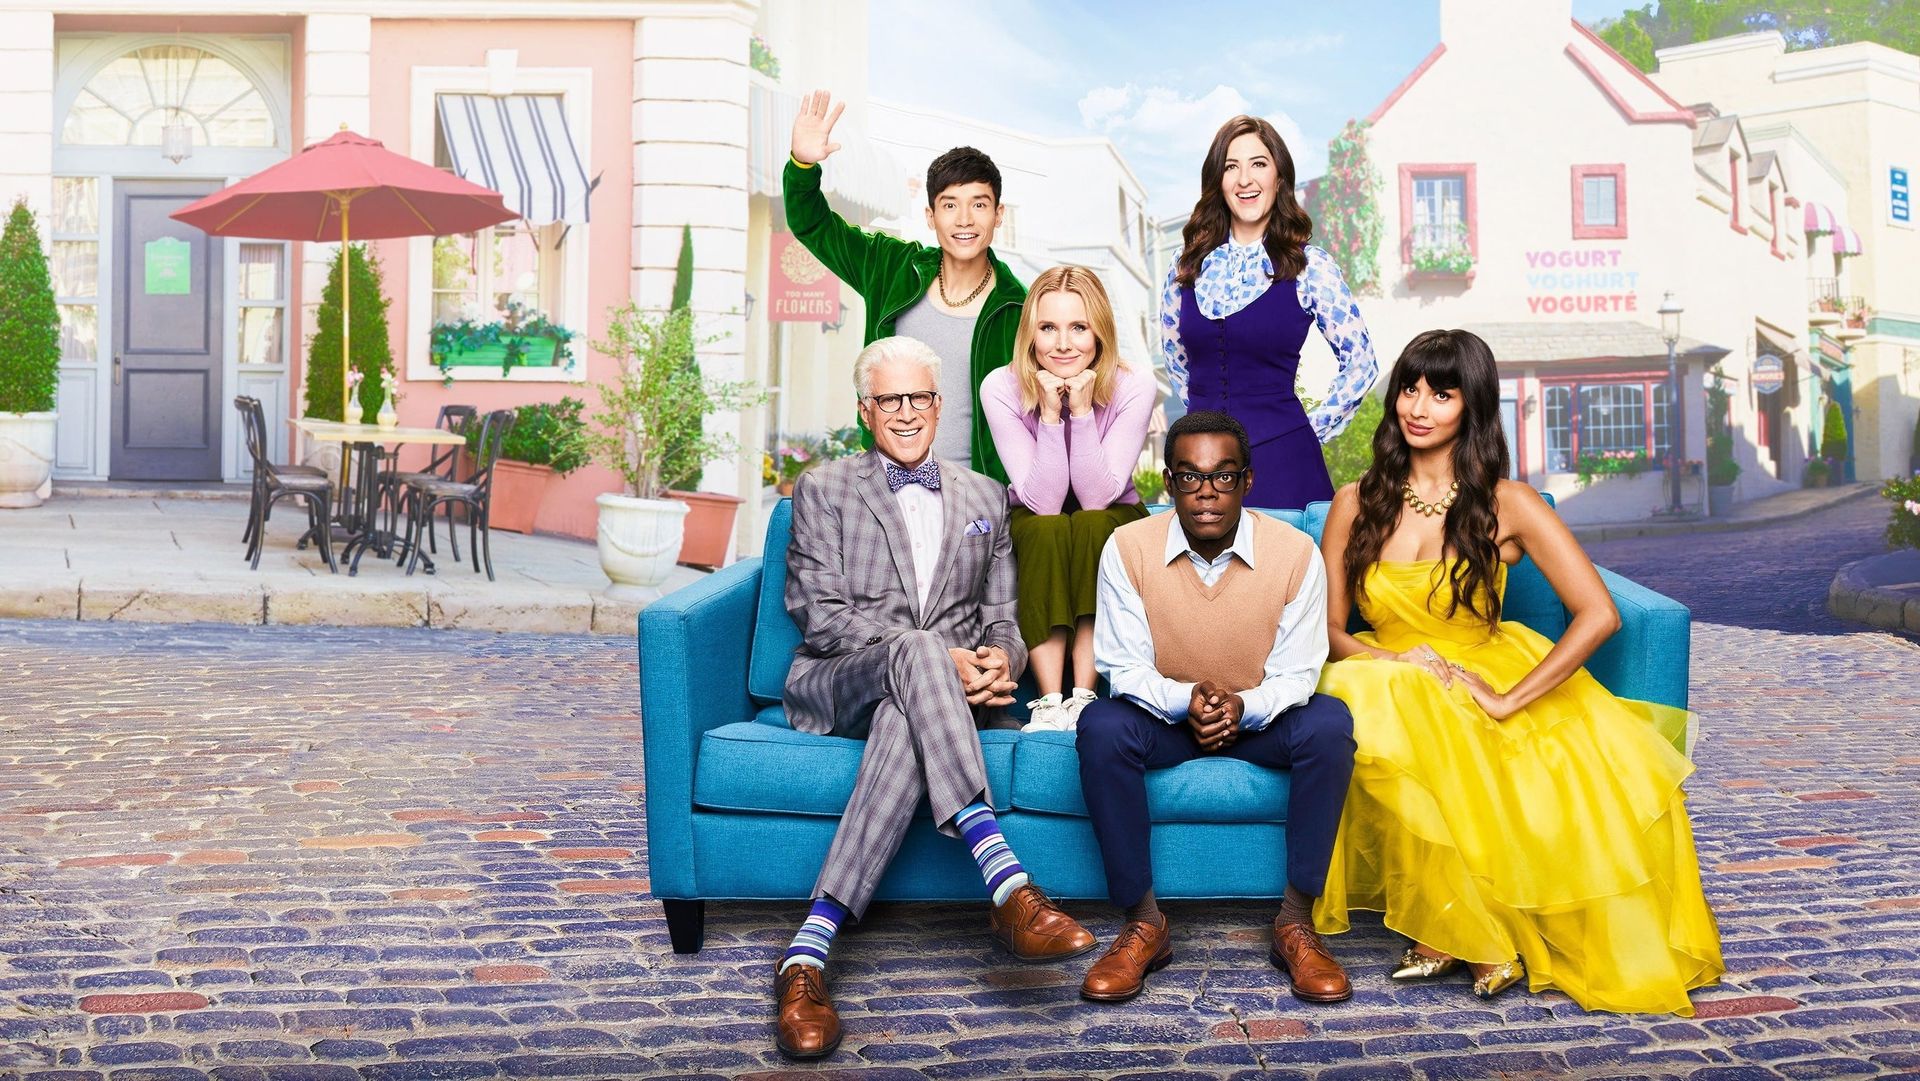 The Good Place Backdrop